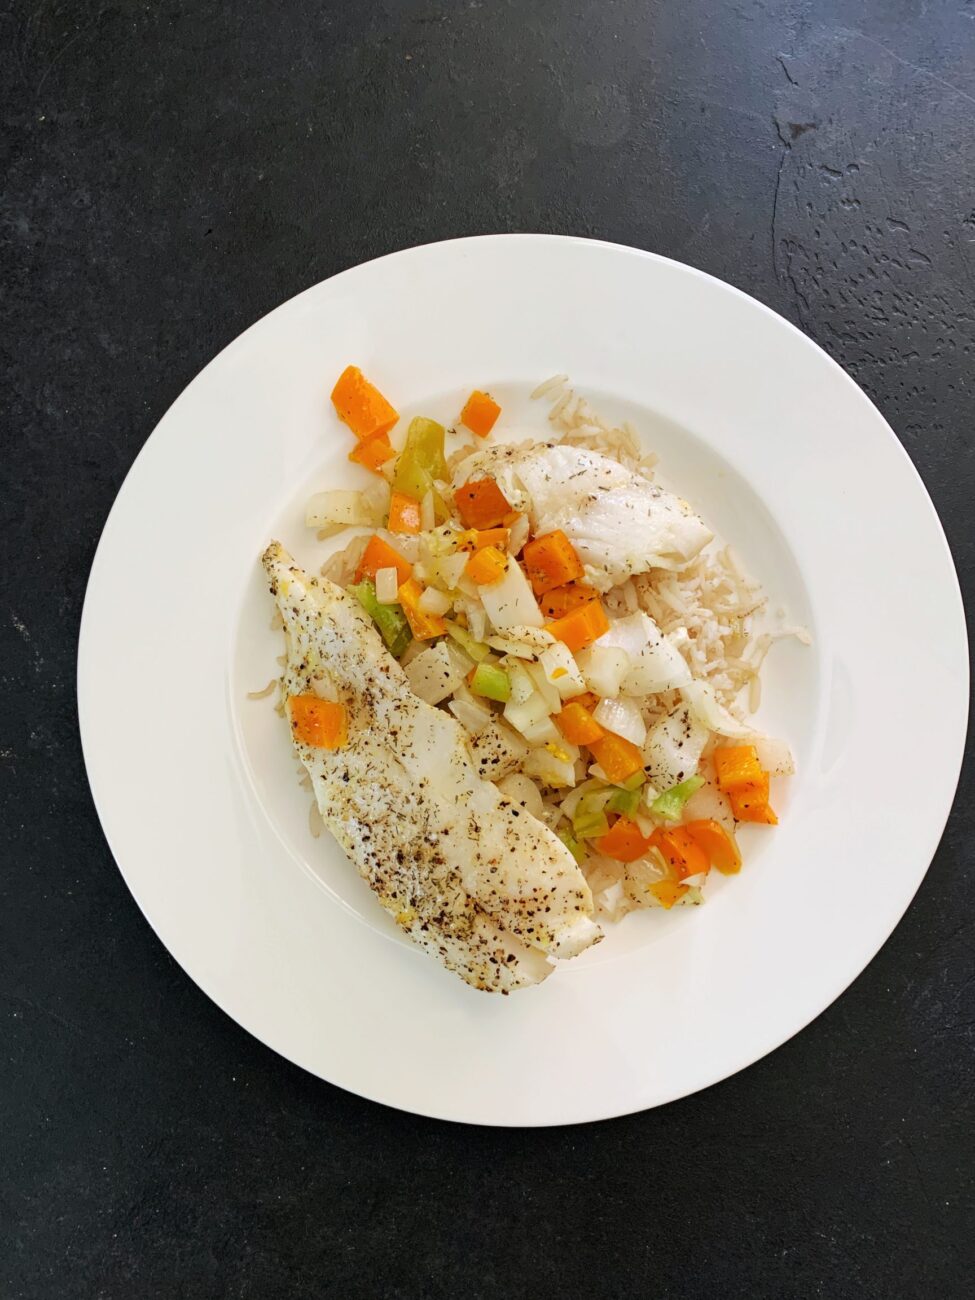 Orange Roughy With Dill Sauce